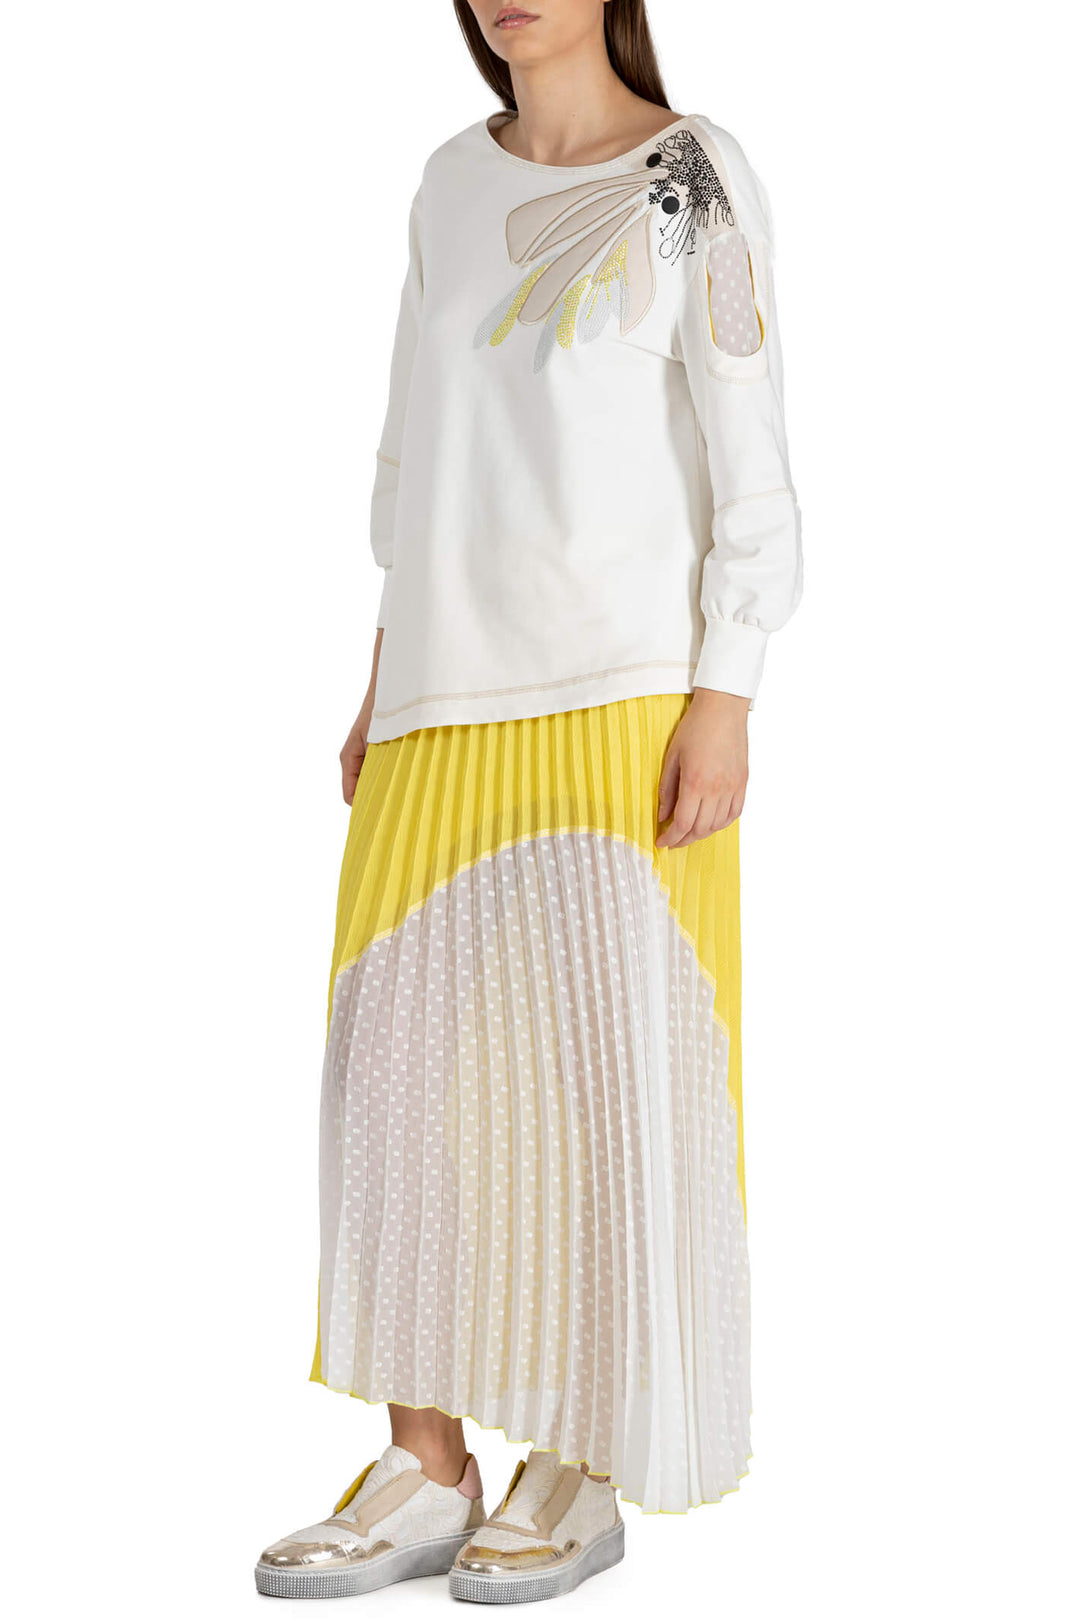 Elisa Cavaletti ELP233040601 Yellow Pleated Skirt - Experience Boutique